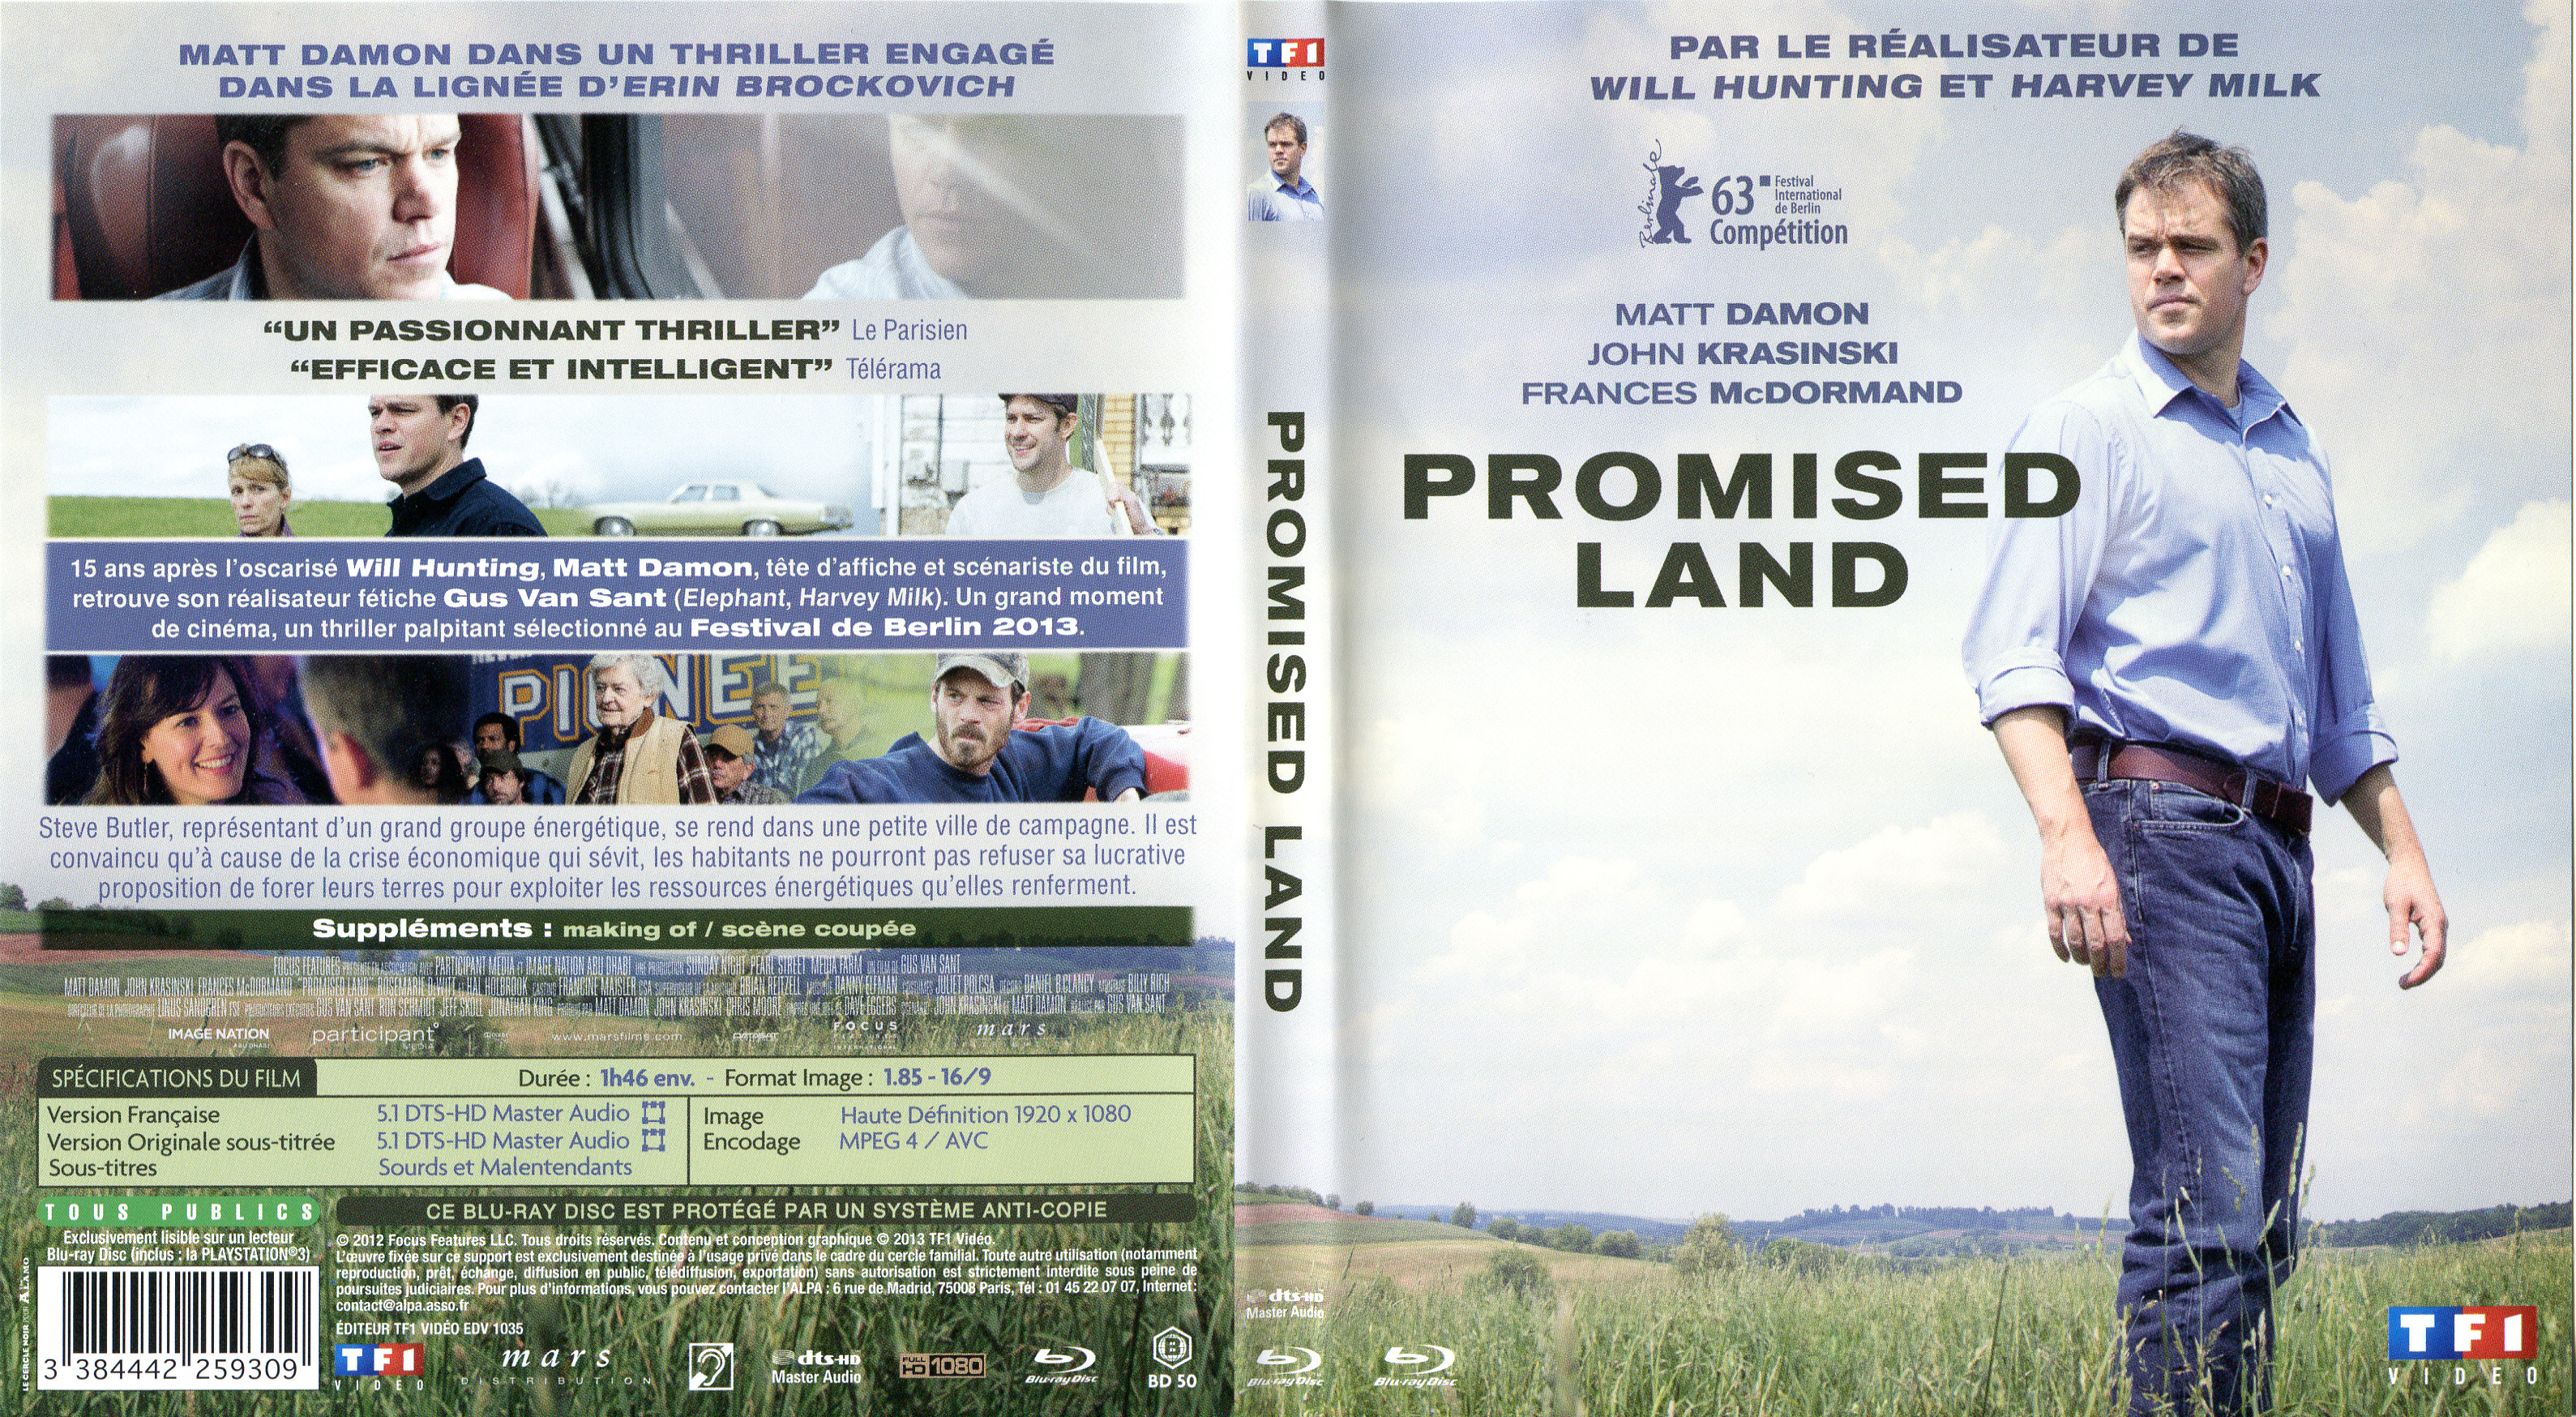 Jaquette DVD Promised land (BLU-RAY)